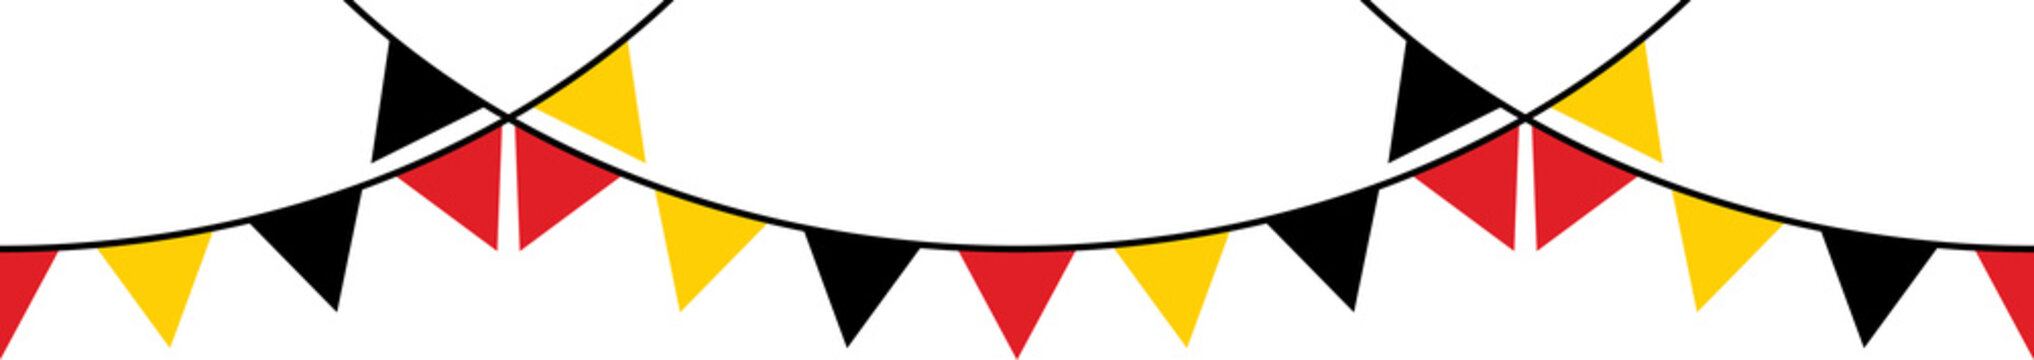 Seamless flag of Germany triangle party bunting border. Flat design illustration.	